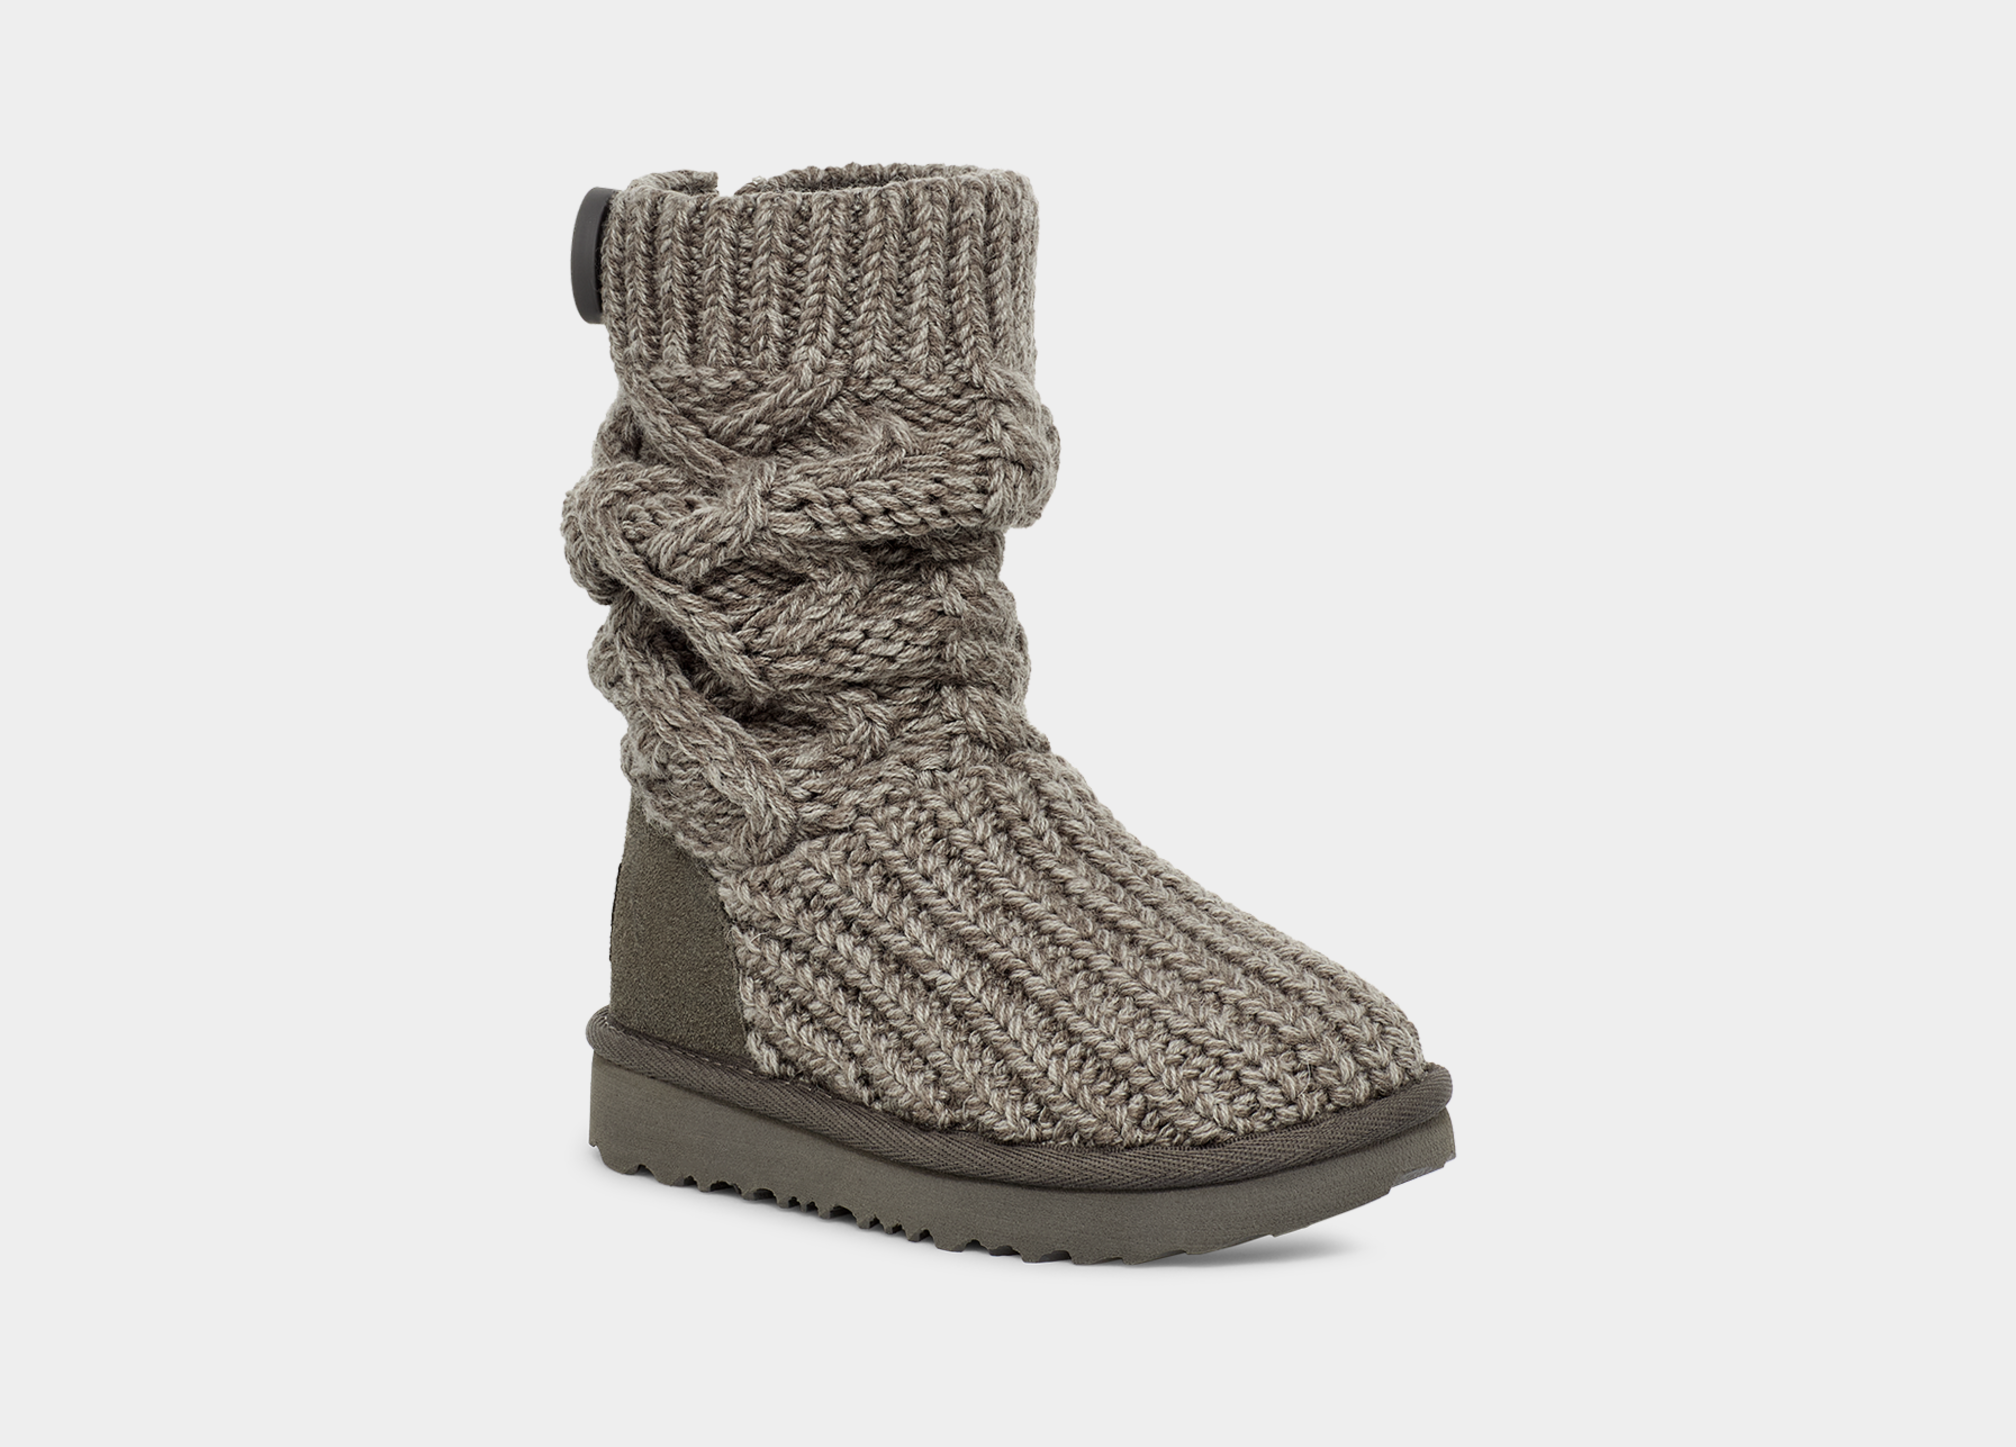 Kids' Classic Cardi Cabled Knit Boot | UGG®